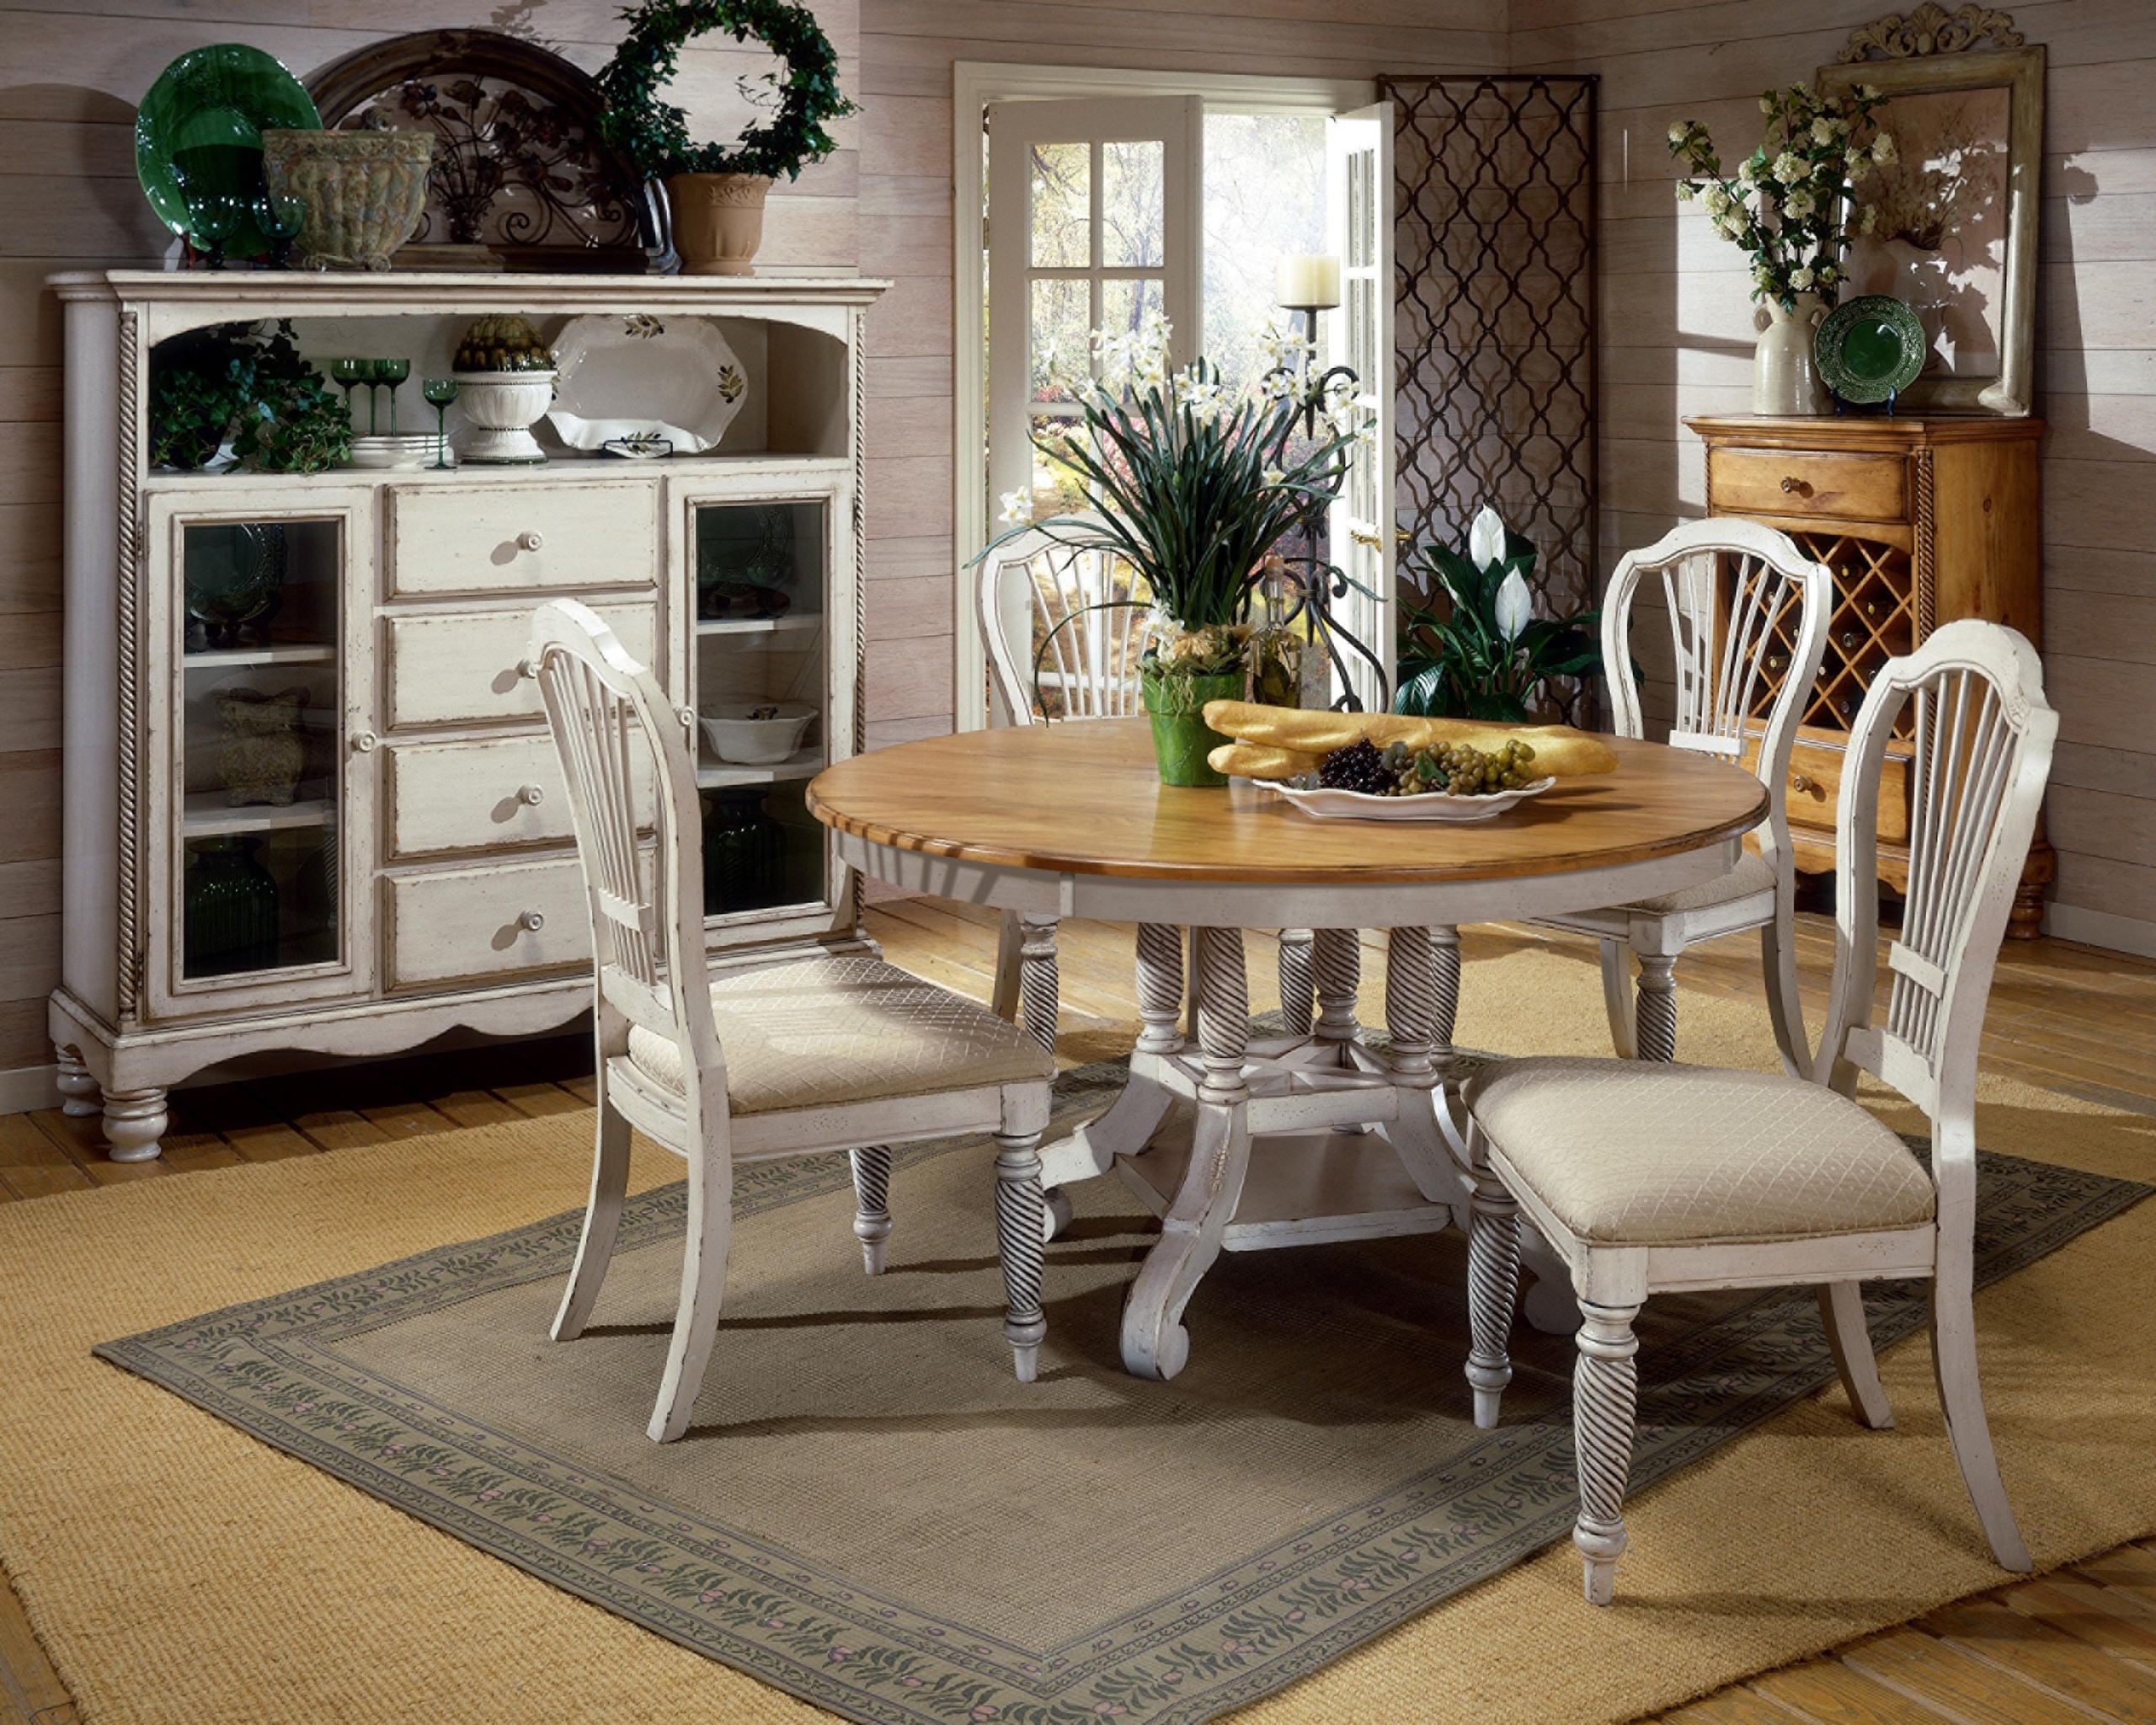 French Country Dining Table Visualhunt, French Country Round Dining Room Table